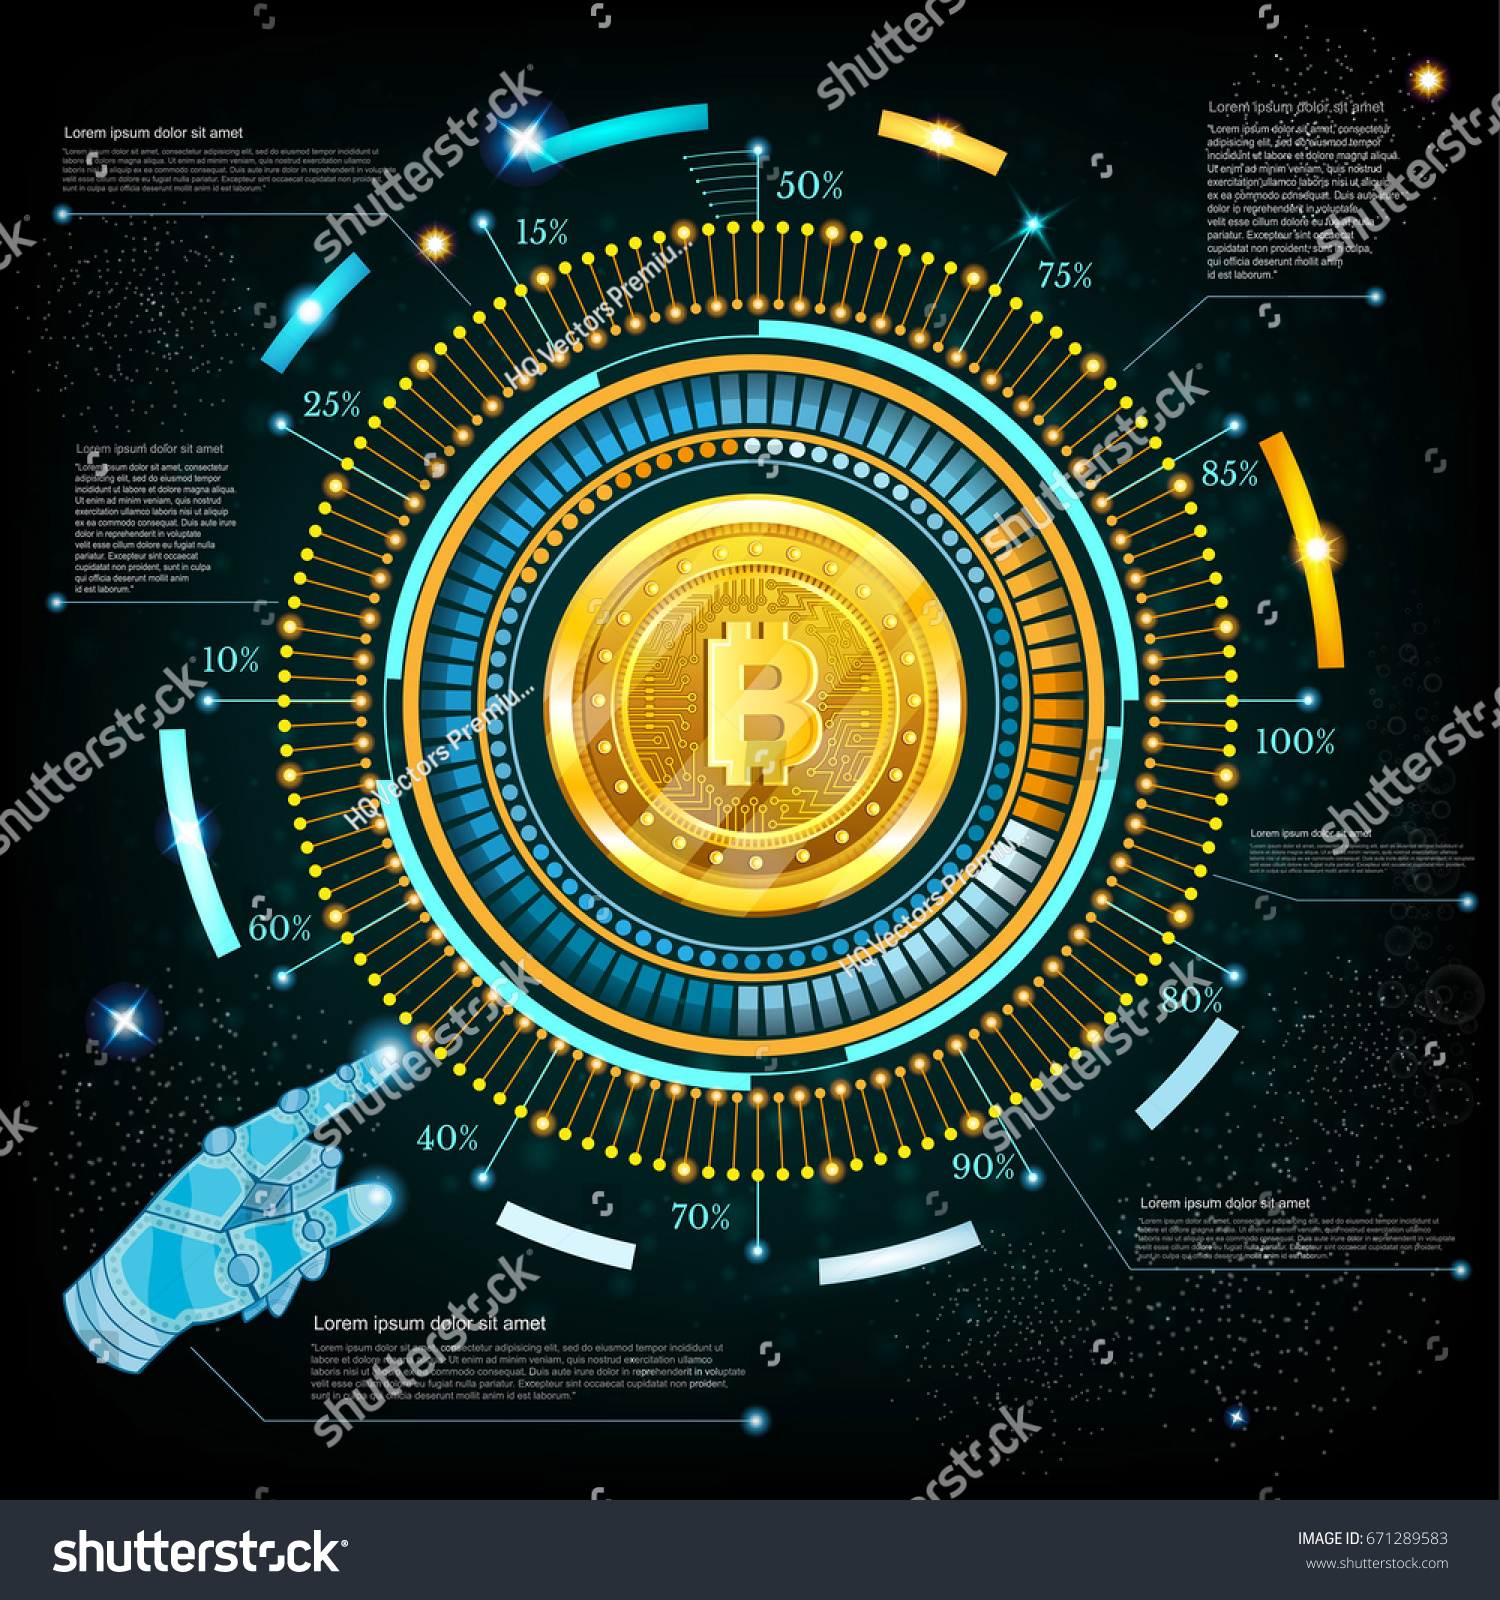 SVG of Business background with golden bit coin in center of round high tech futuristic info graphic svg